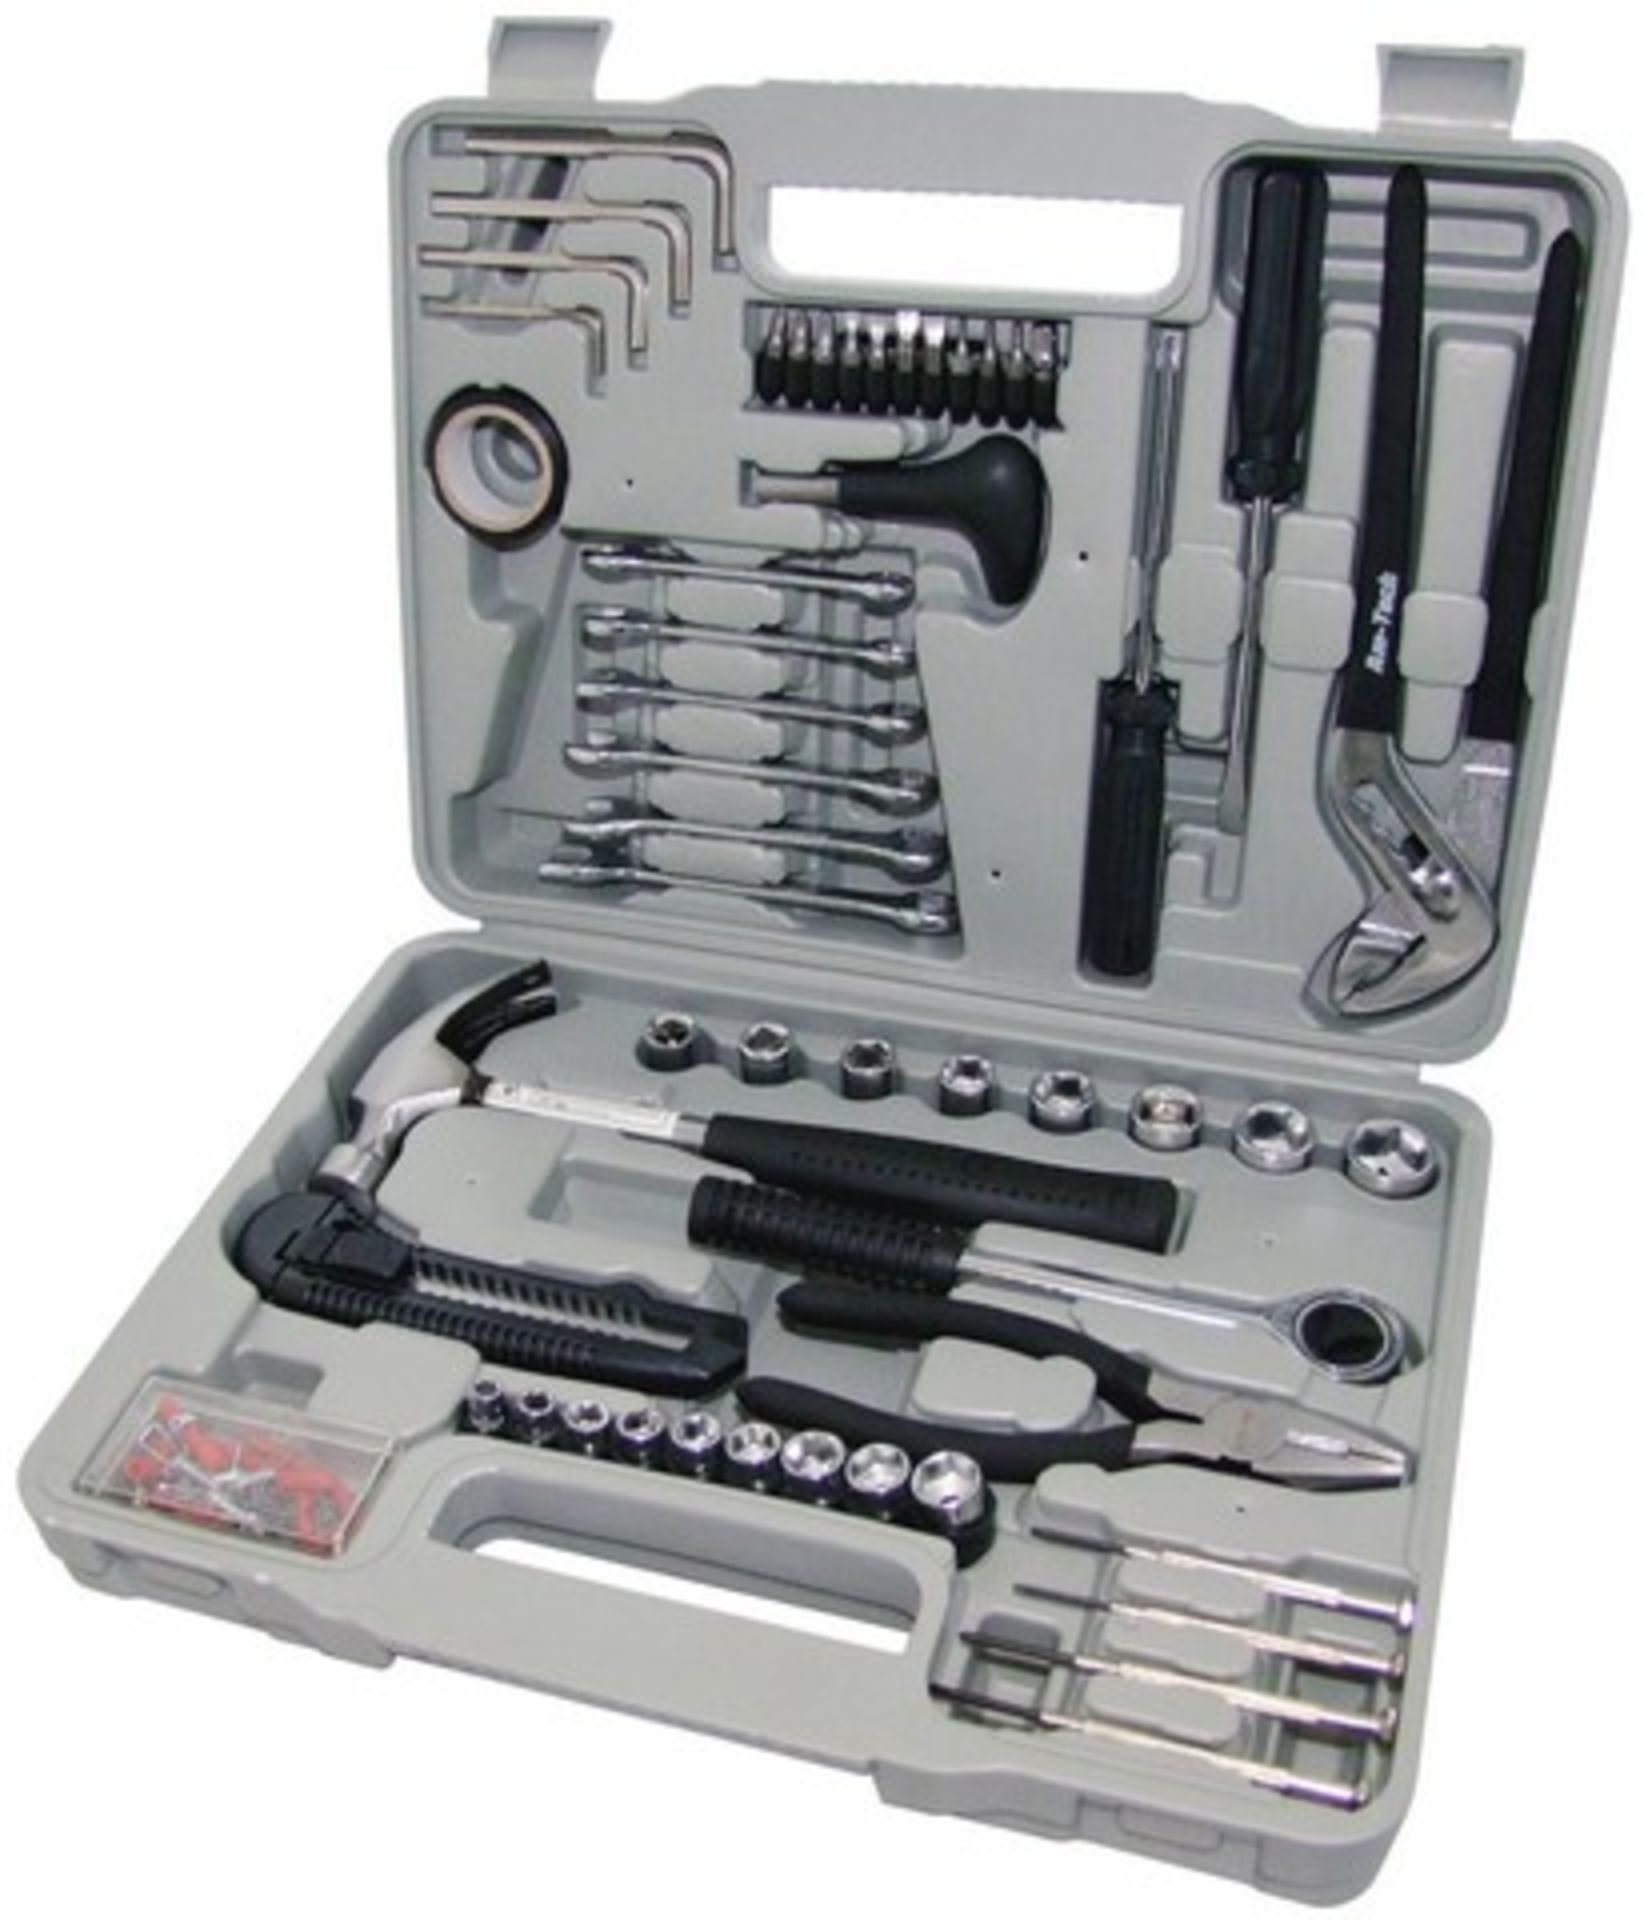 V Brand New 141 piece Tool Kit Includes Screwdivers, Sockets Hex Keys, Wrenches, Screwdriver Bits,